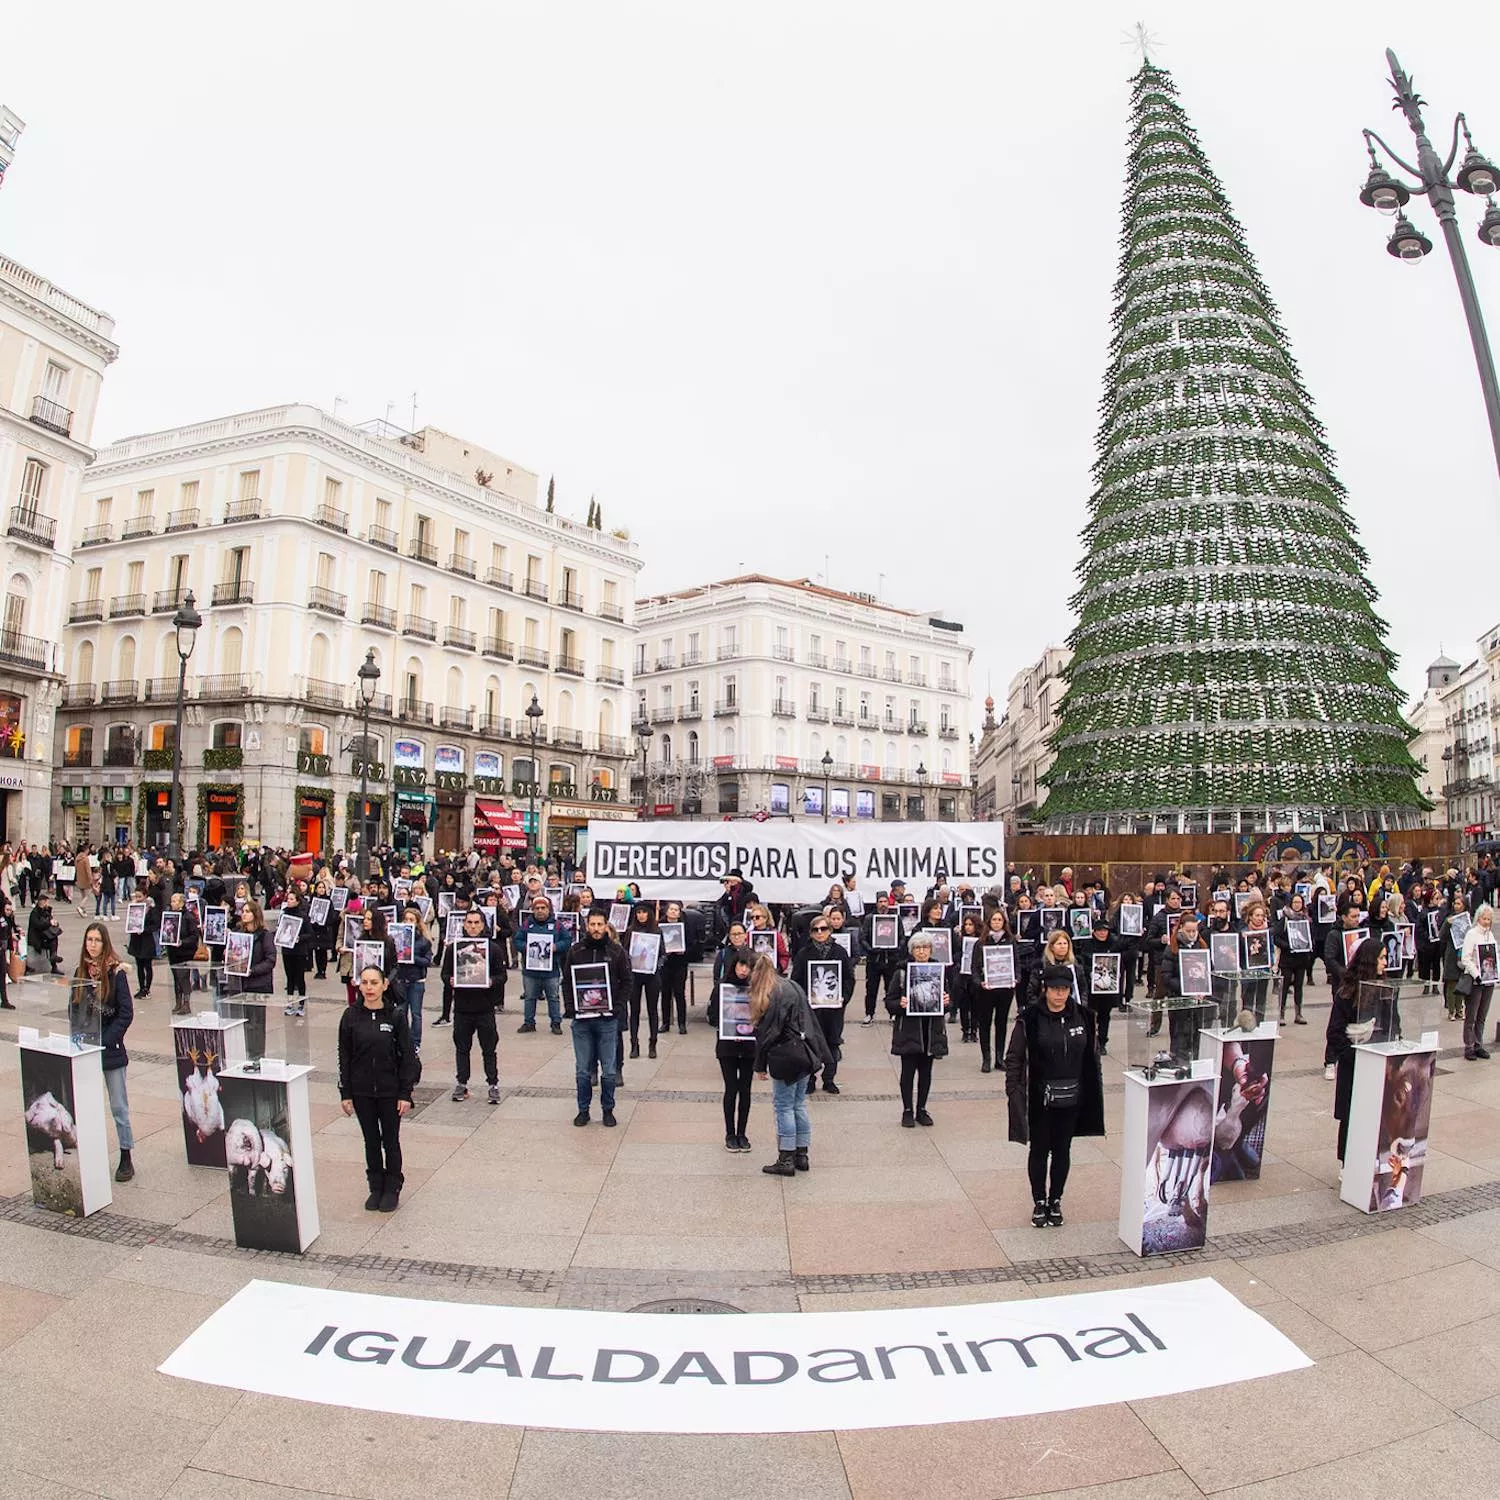 Animal Rights Day protest in Spain